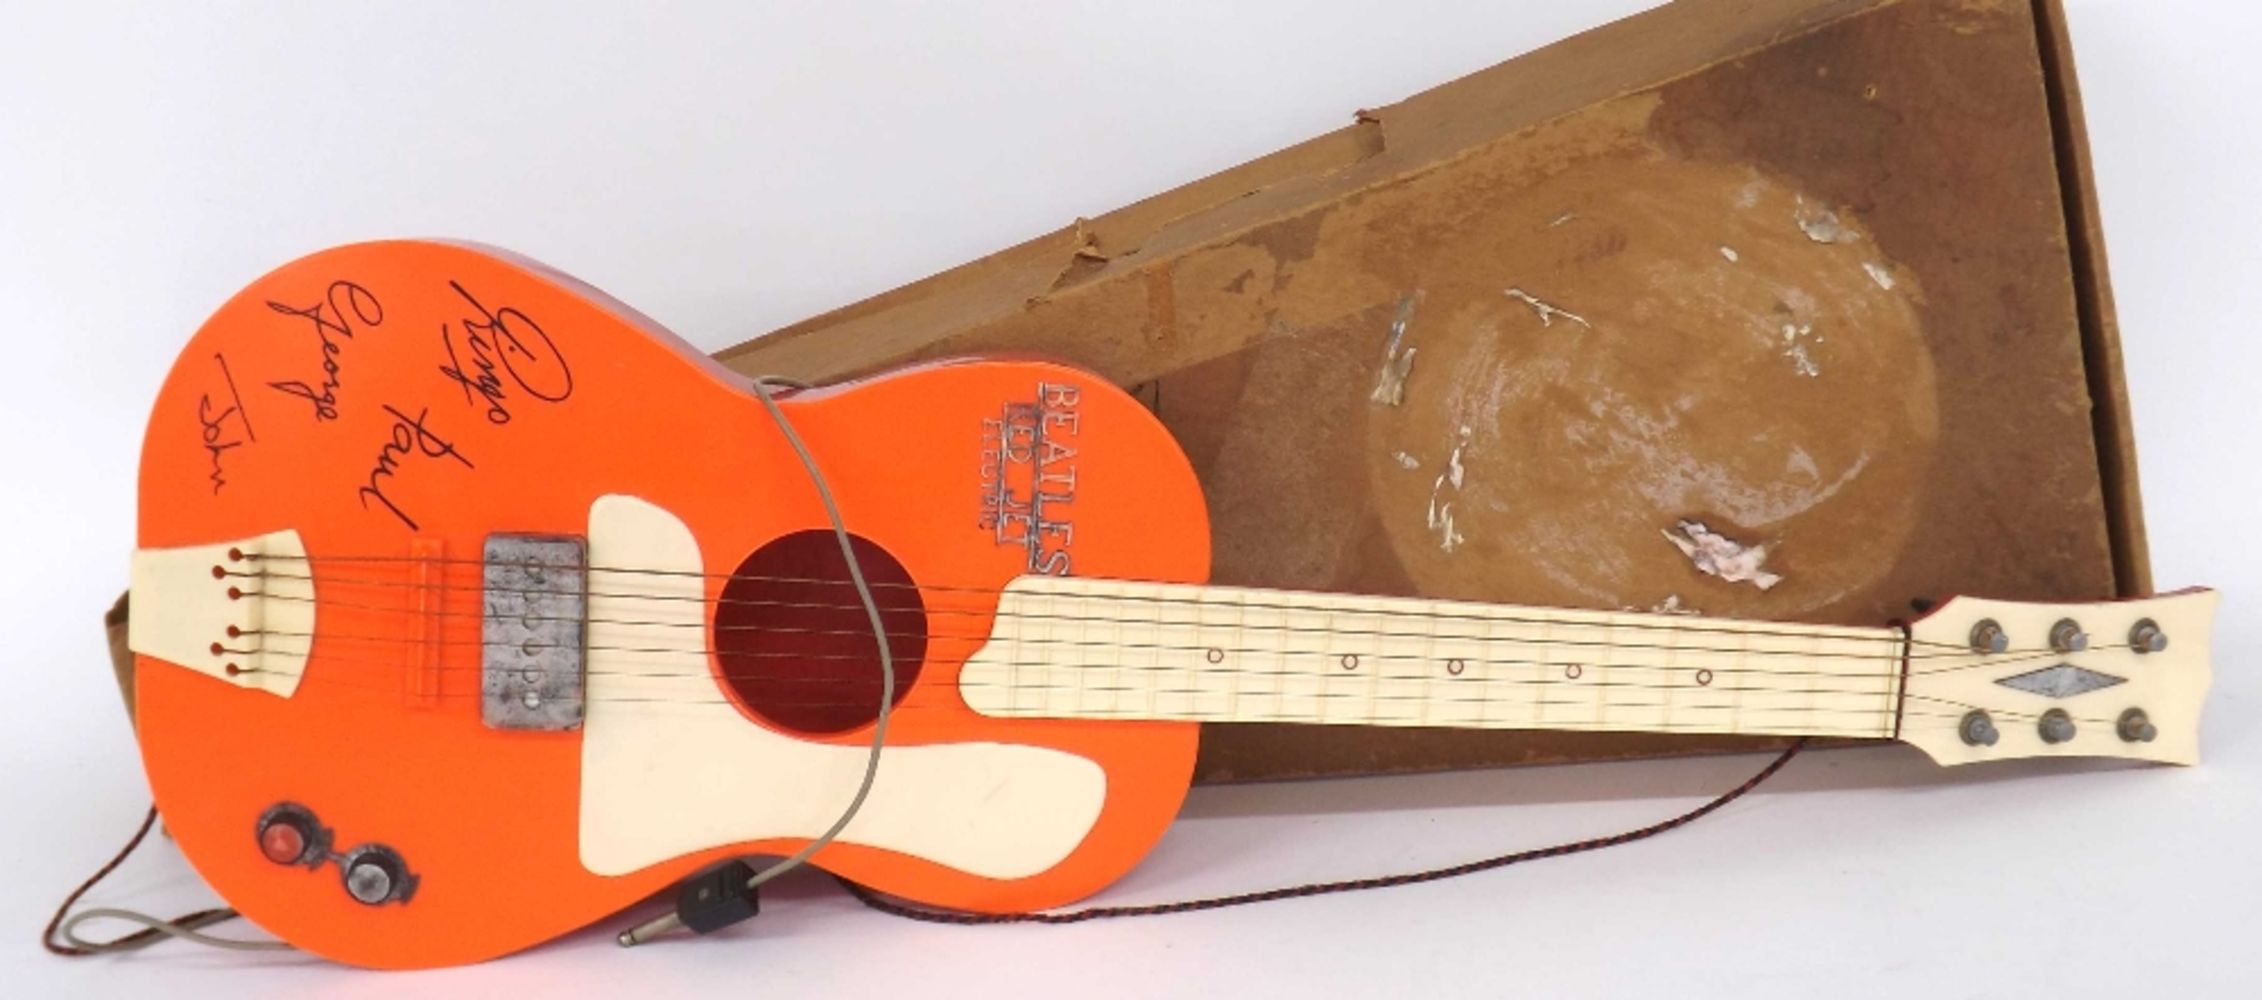 The Guitar Auction - Day Two - ONLINE & ABSENTEE BIDDING ONLY - OPEN FOR PUBLIC VIEWING